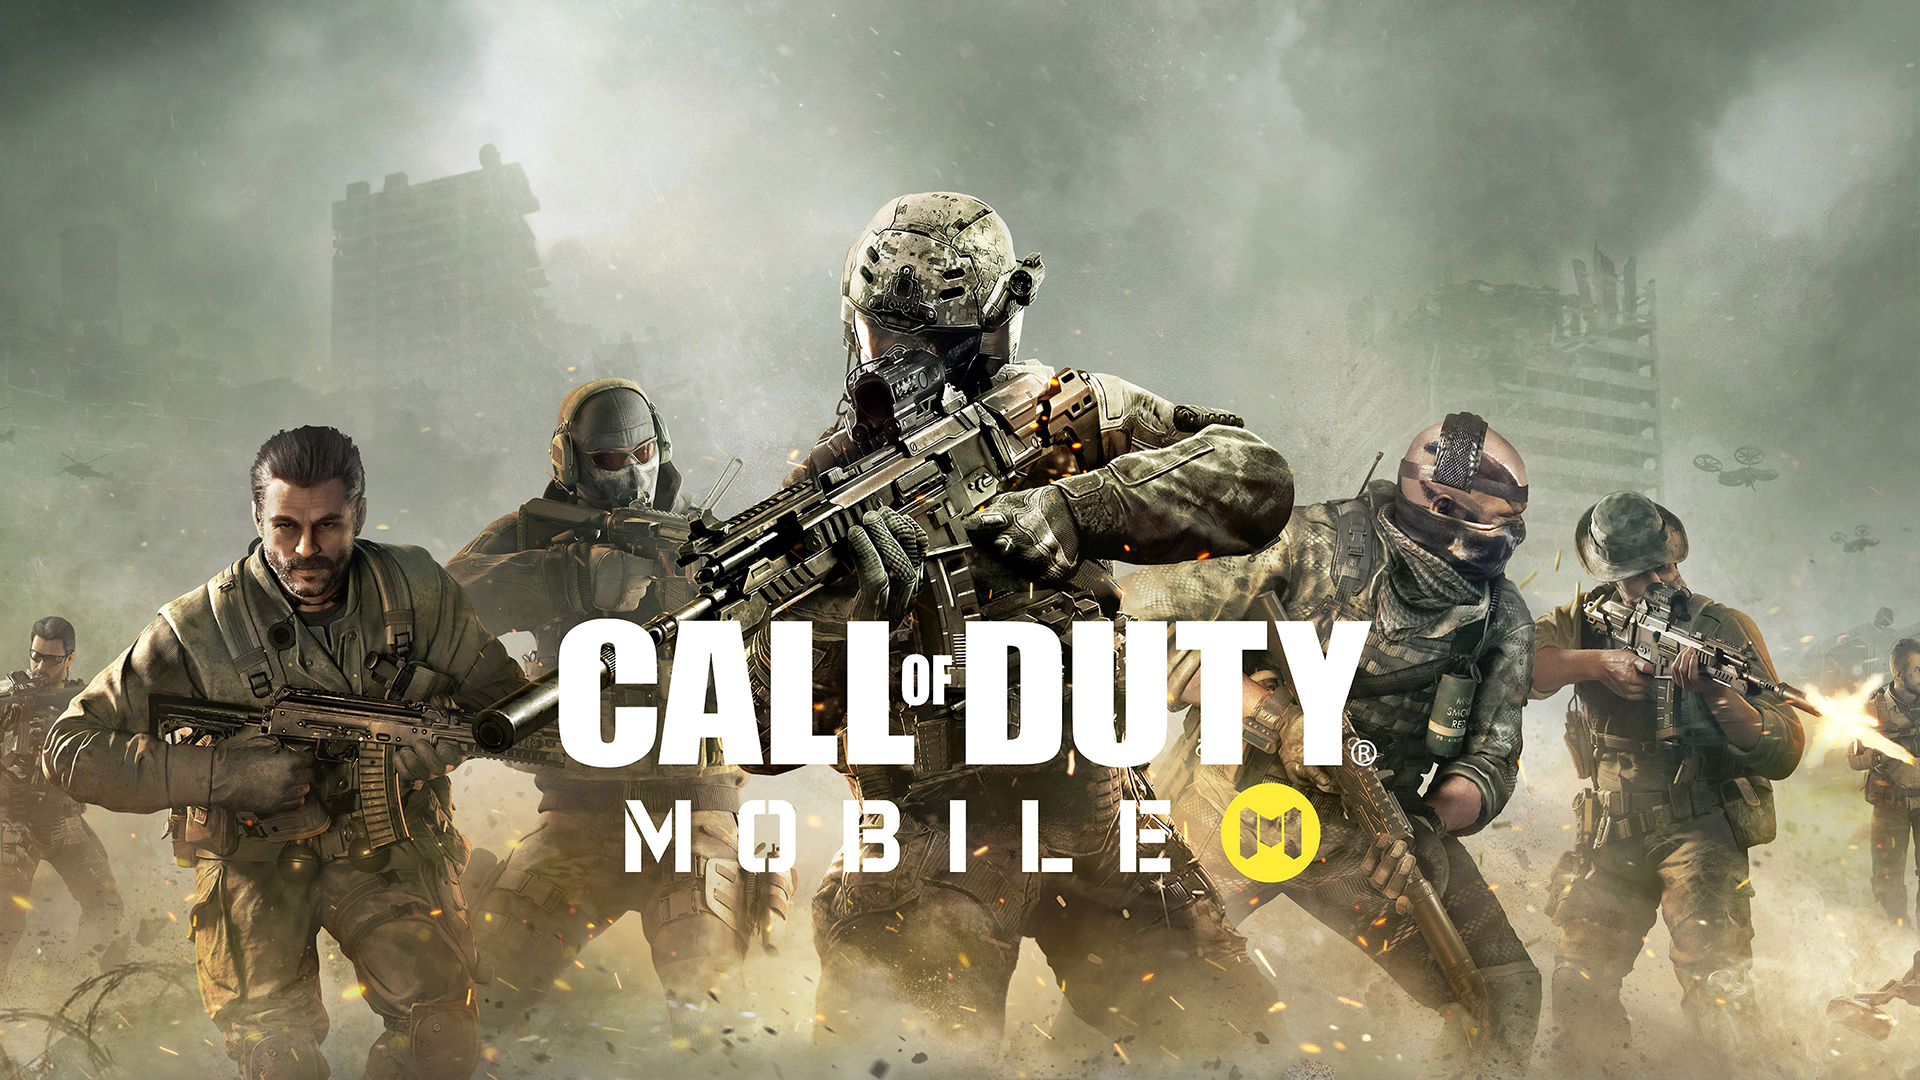 Are You Having Trouble Redeeming Your Items in Call of Duty Mobile?